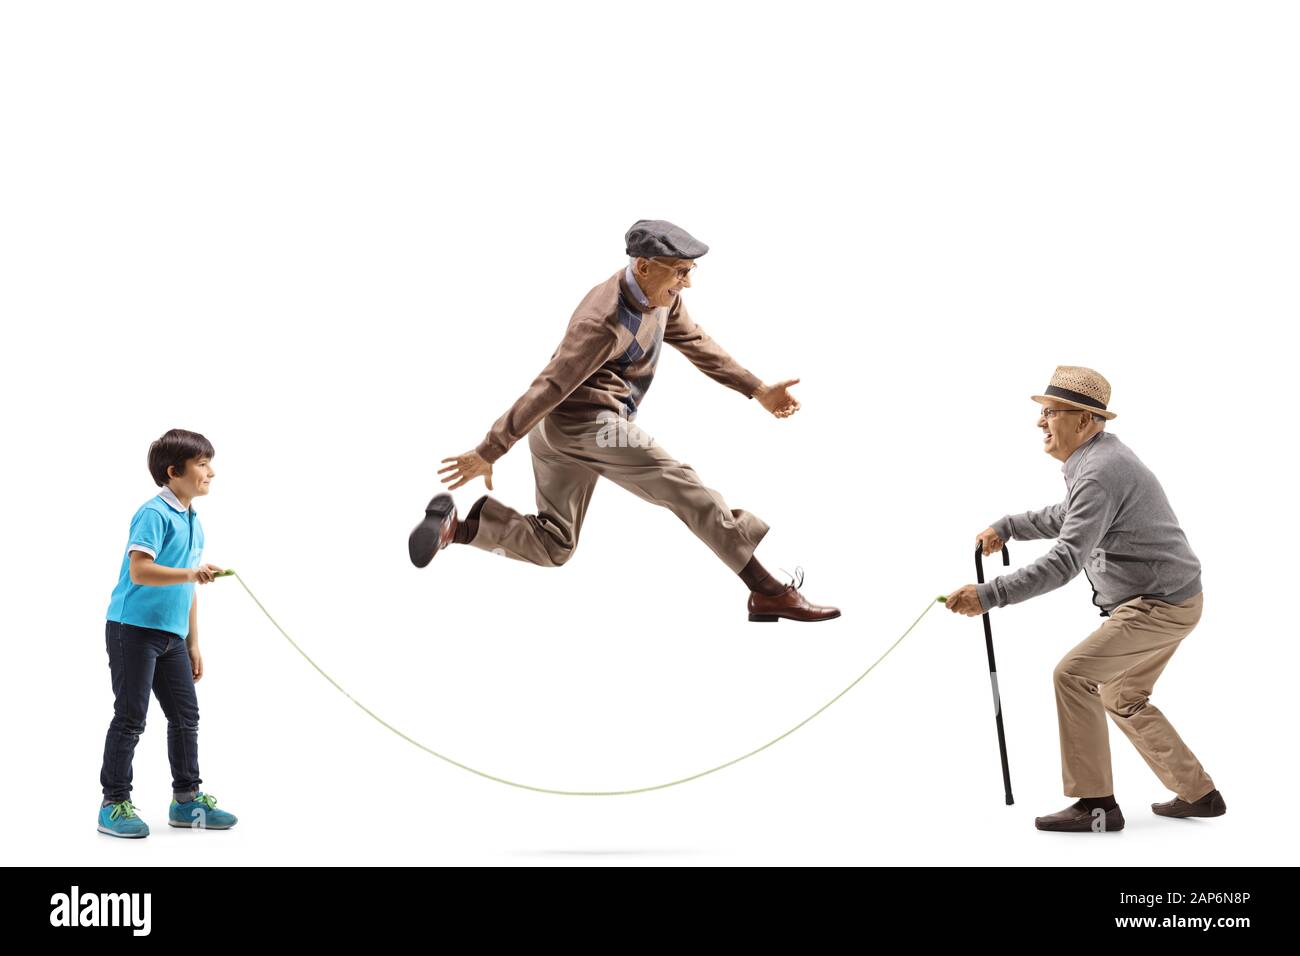 Full length profile shot of a grandfather and grandson holding a rope and an elderly man skipping isolated on white background Stock Photo